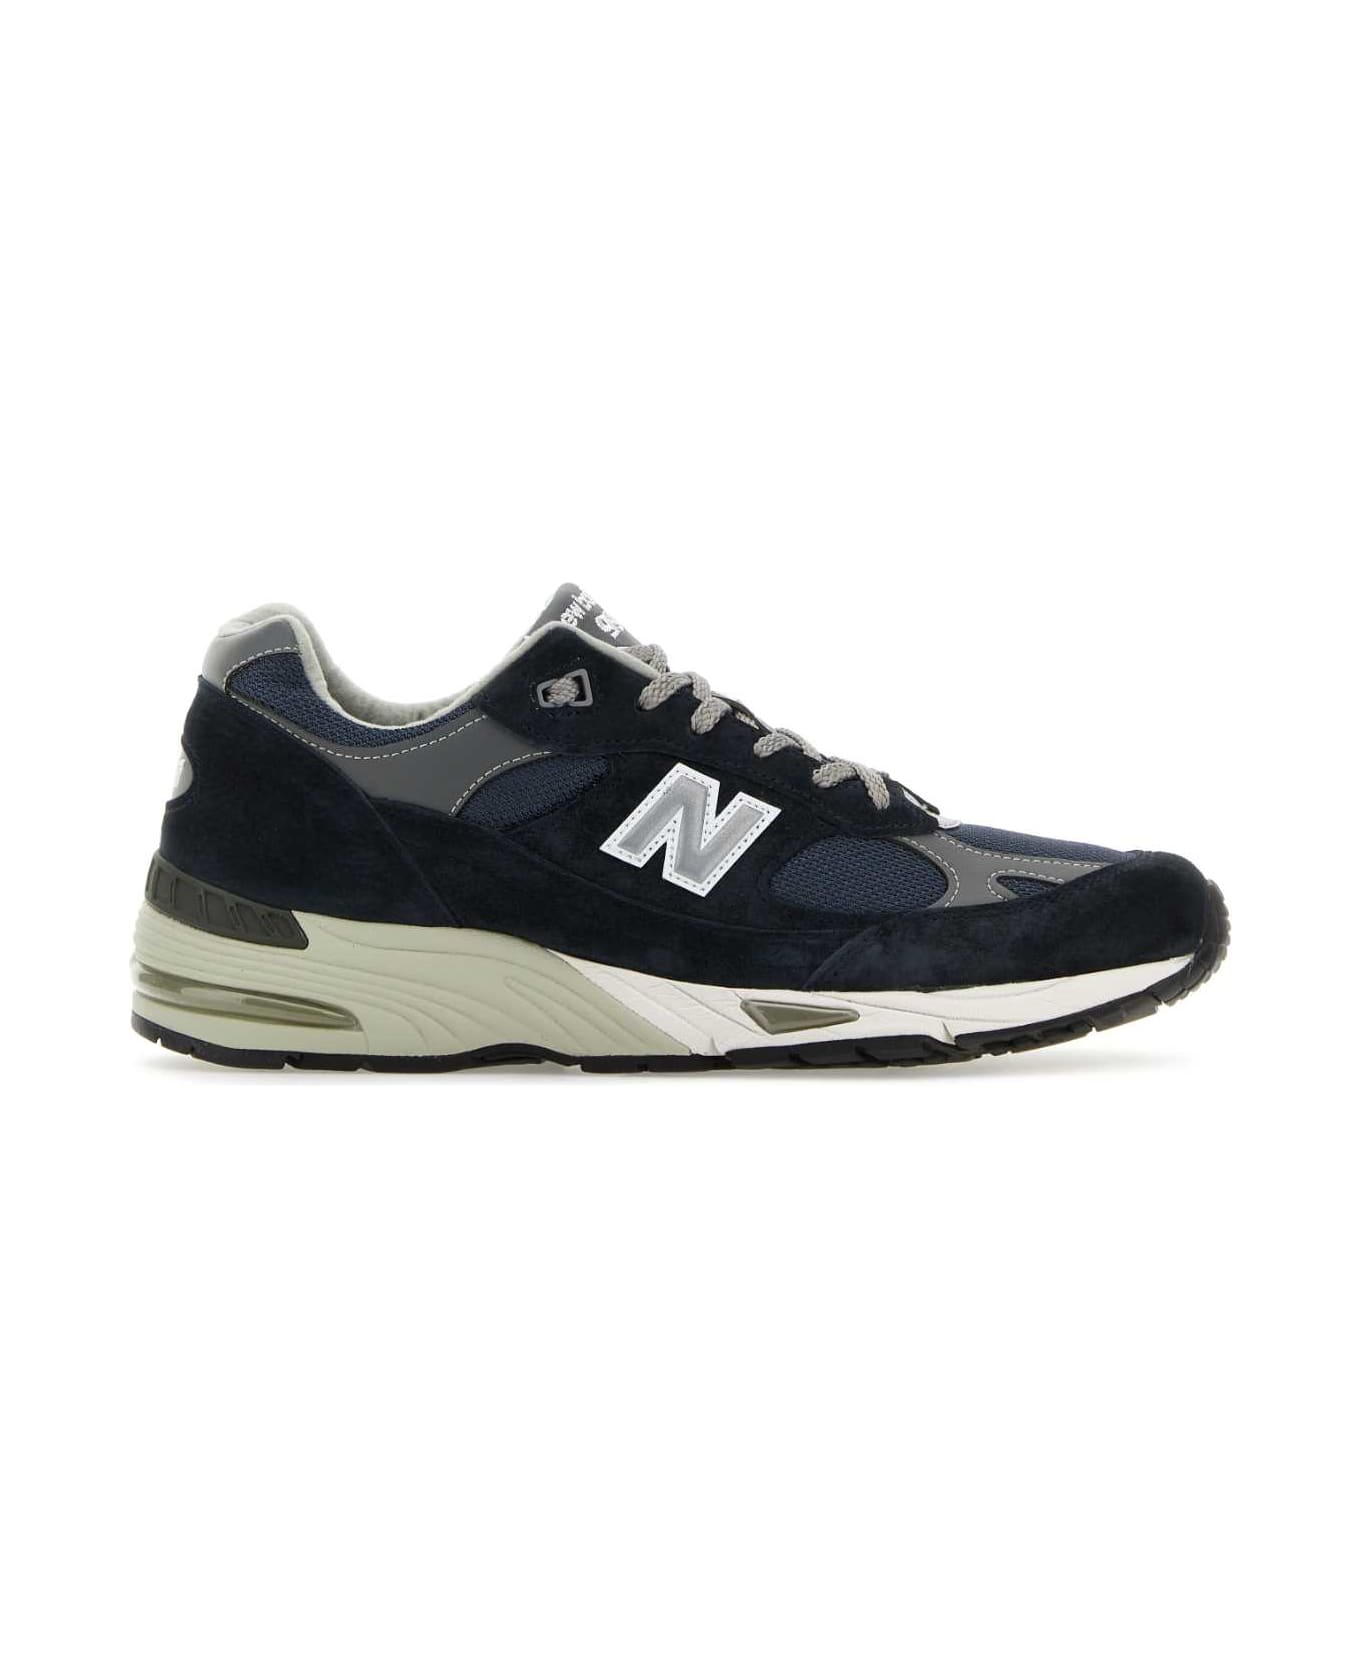 New Balance Two-tone Suede And Mesh 991 Sneakers - NAVY スニーカー